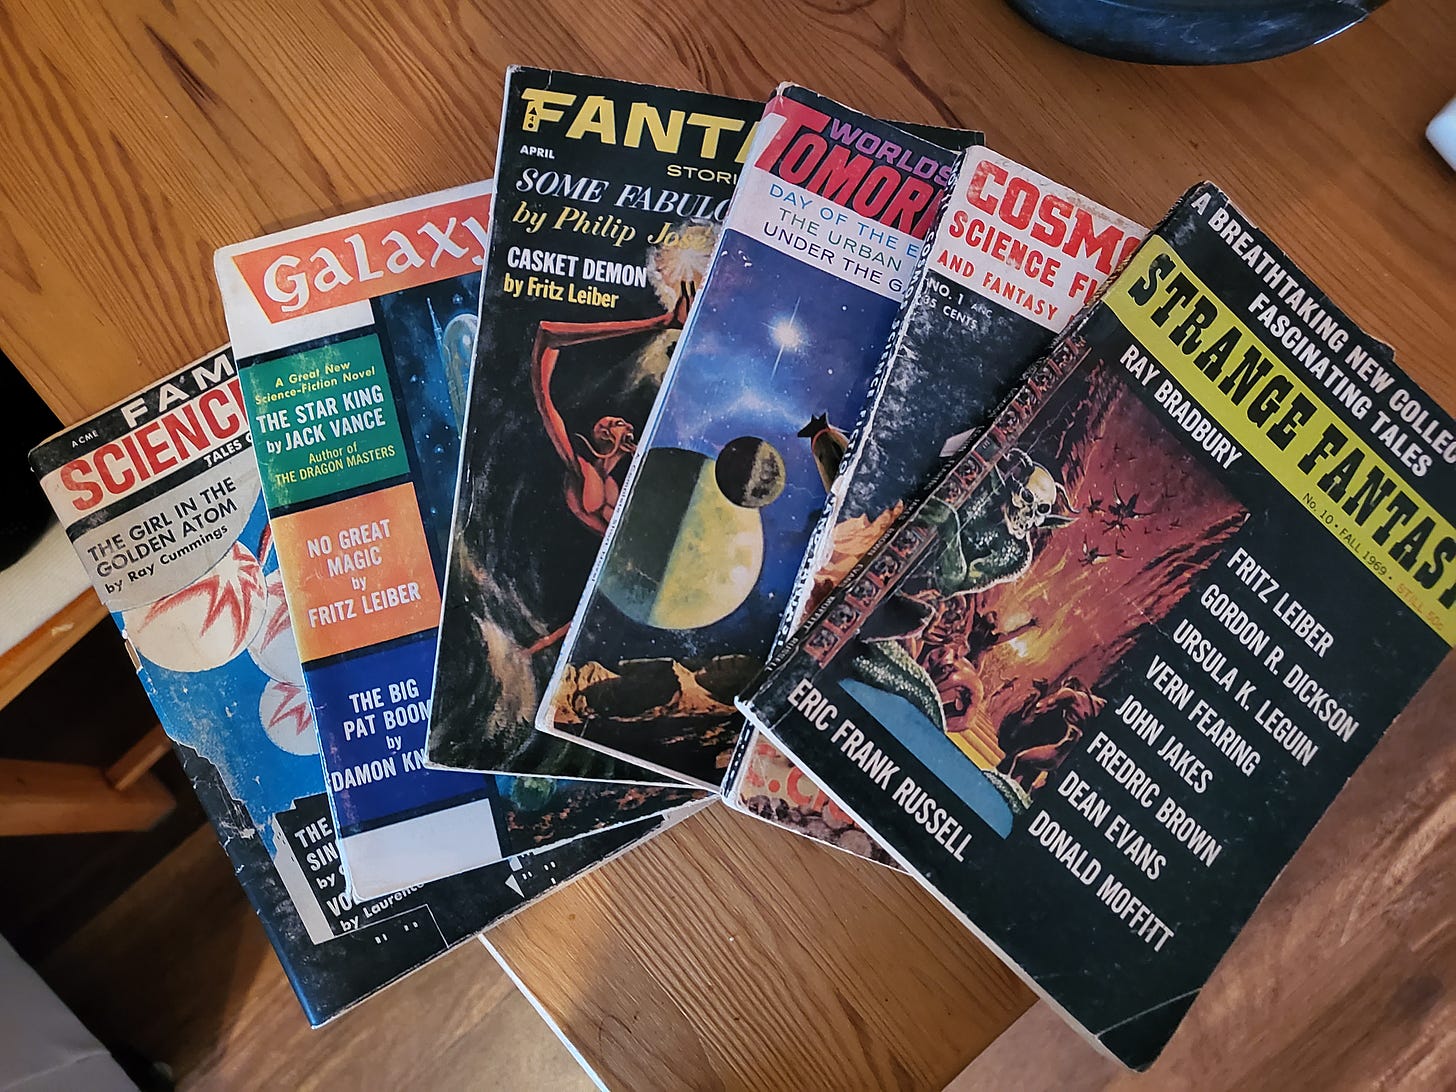 An array of science fiction magazines from the 50s and 60s spread out on a wooden table